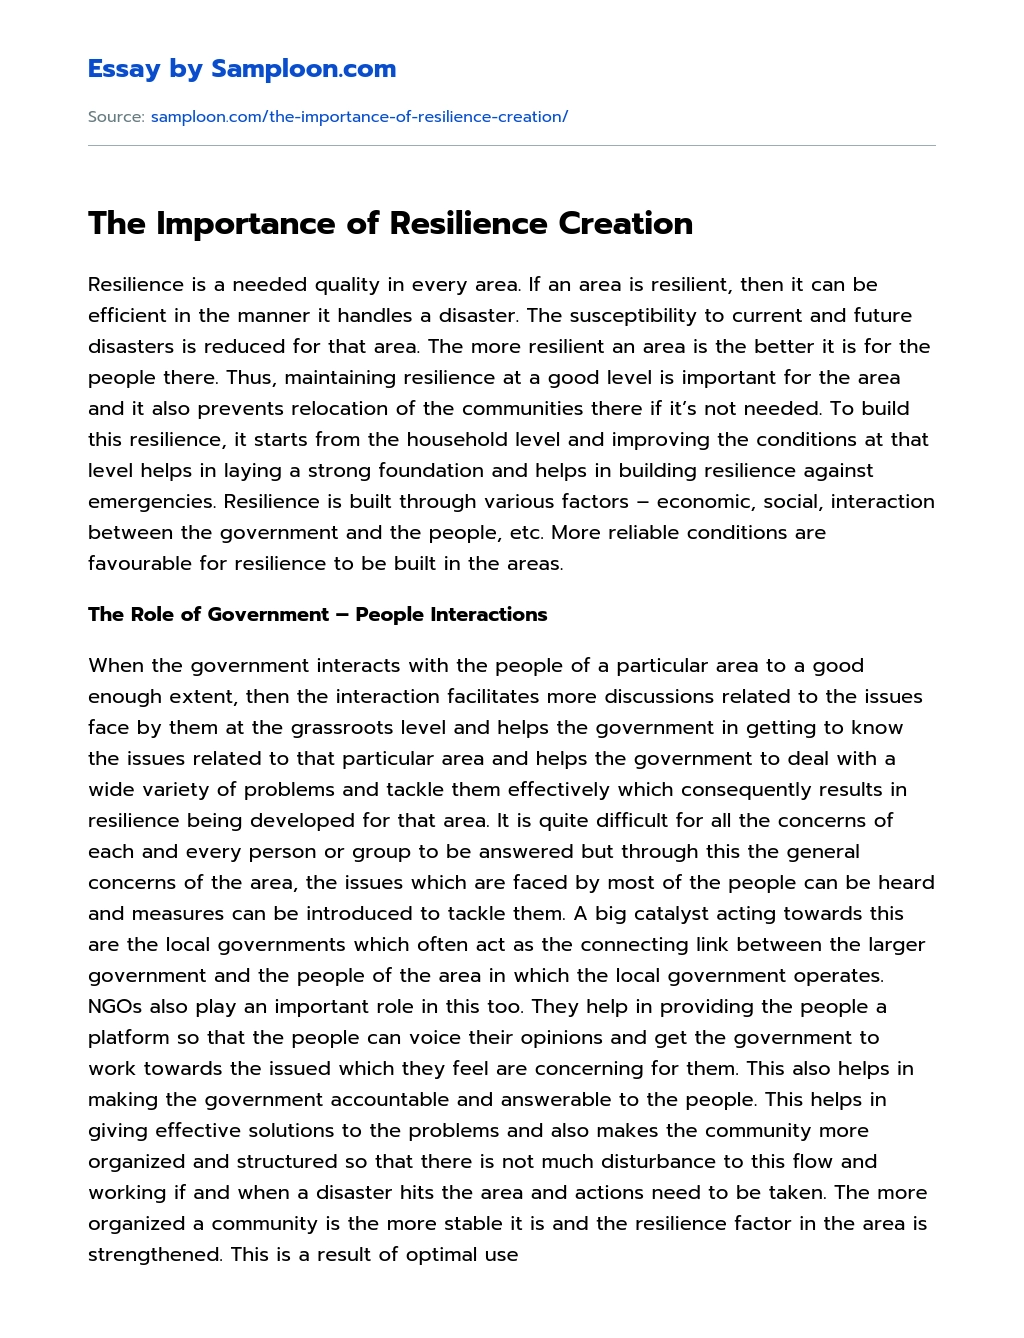 The Importance of Resilience Creation essay